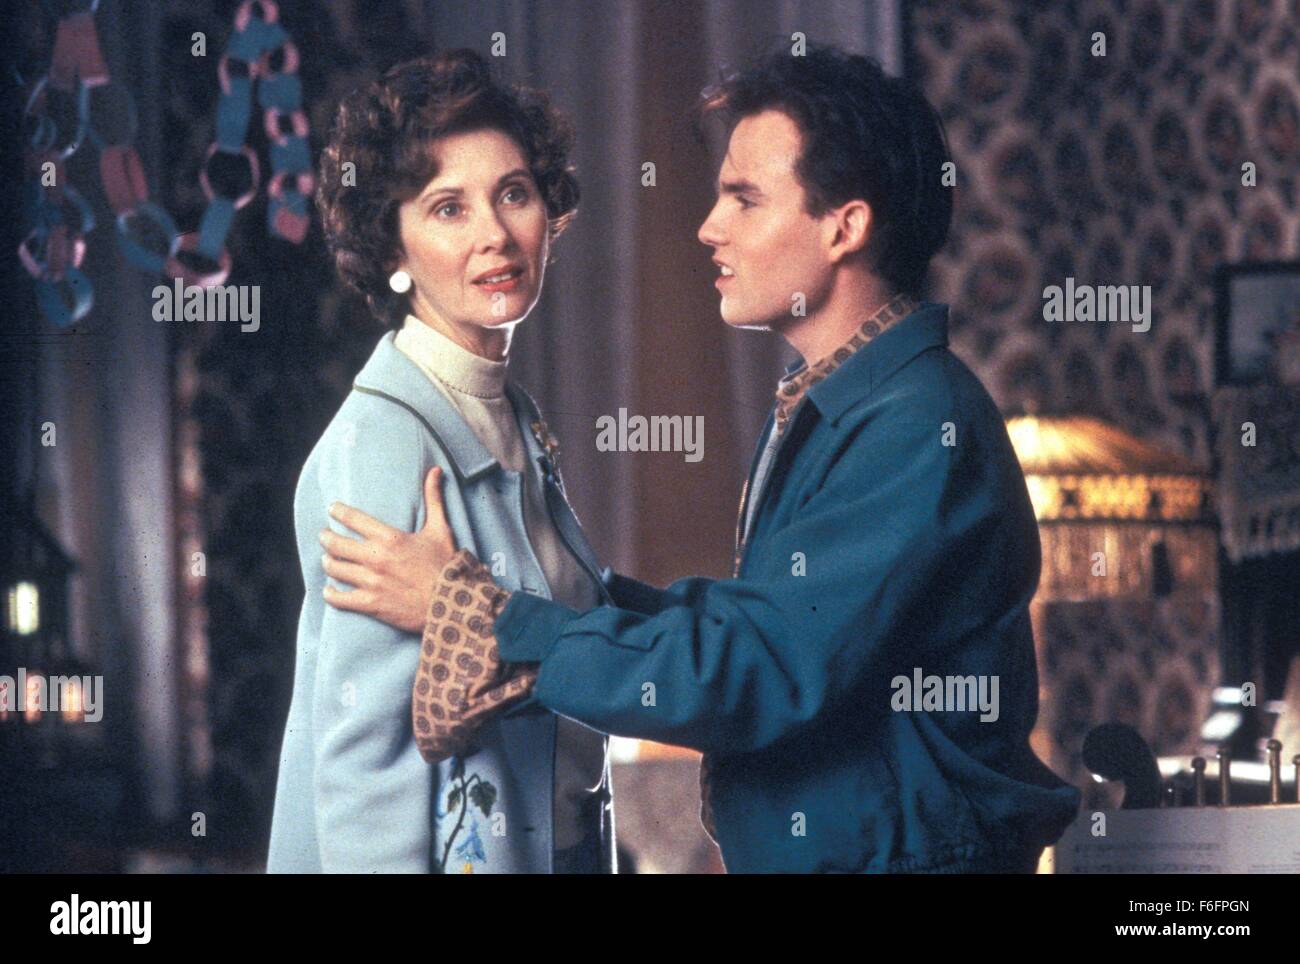 RELEASE DATE: 13 September 1991.  MOVIE TITLE: Freddy's Dead: The Final Nightmare - STUDIO: New Line Cinema. PLOT: Freddy Krueger returns once again to haunt both the dreams of his daughter and Springwood's last surviving teenager. PICTURED: ELINOR DONAHUE as Orphanage Woman and SHON GREENBLATT as John Doe. Stock Photo